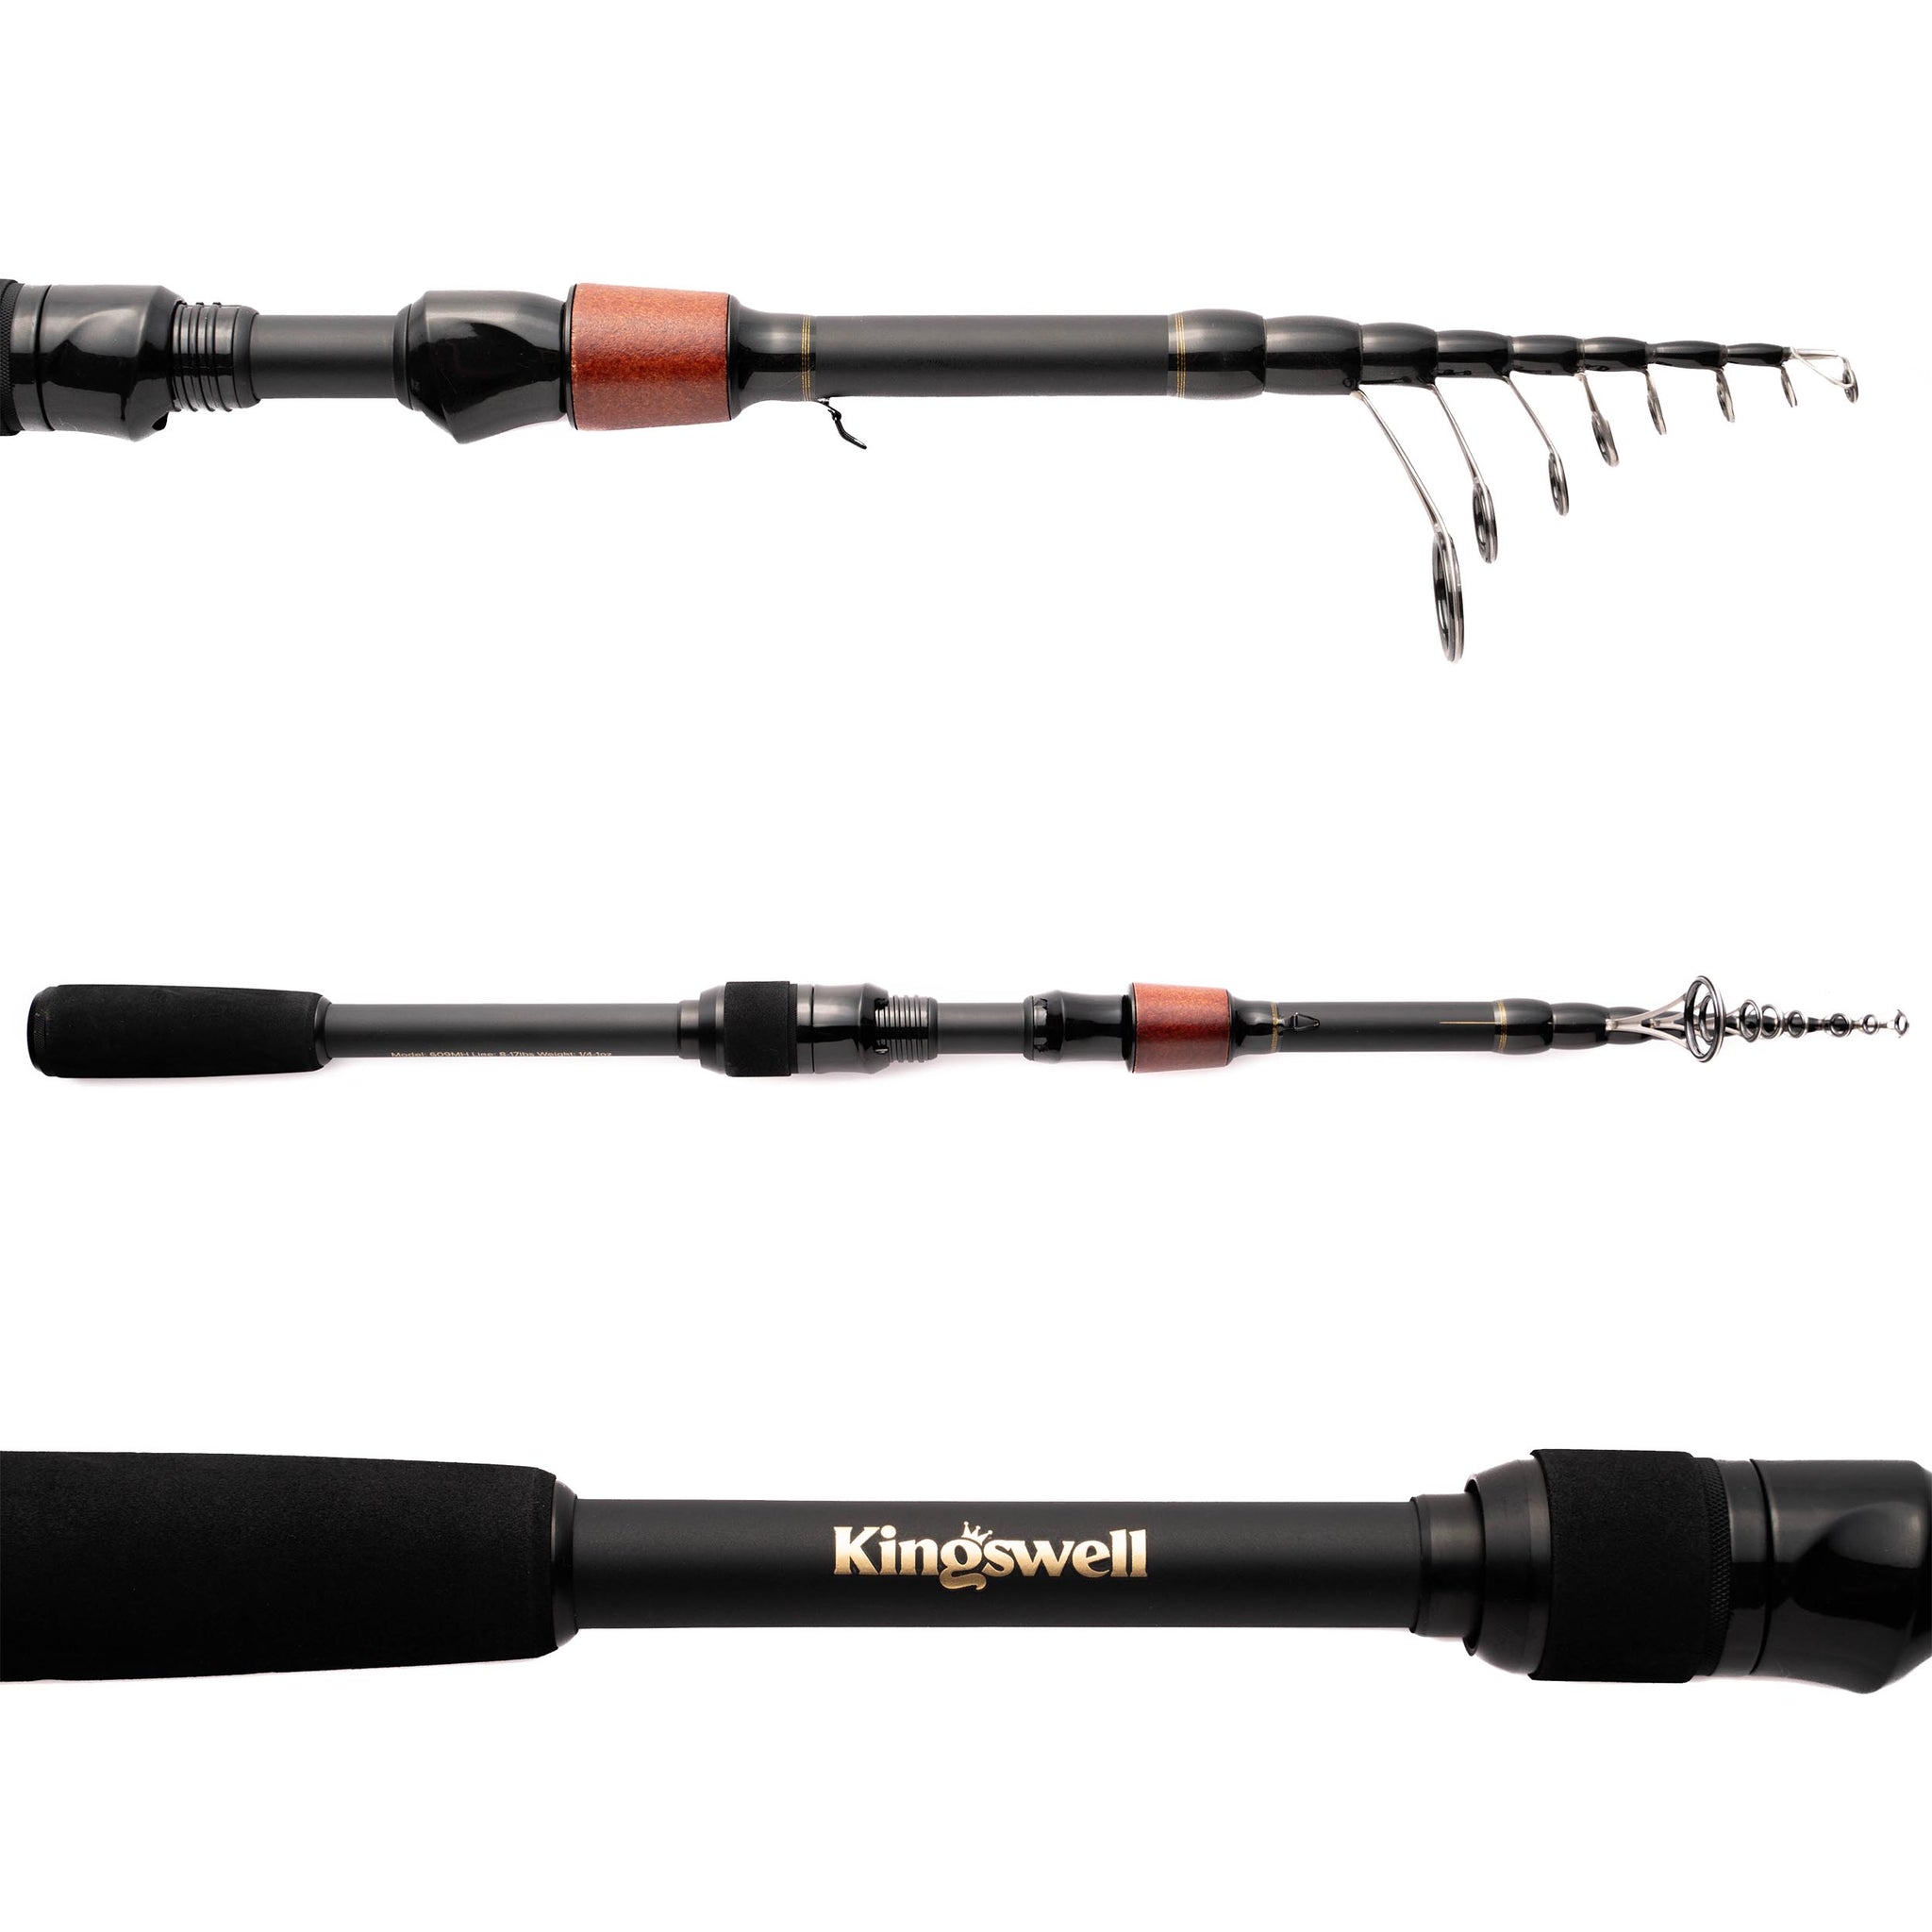 What is Telescopic Fishing Rod